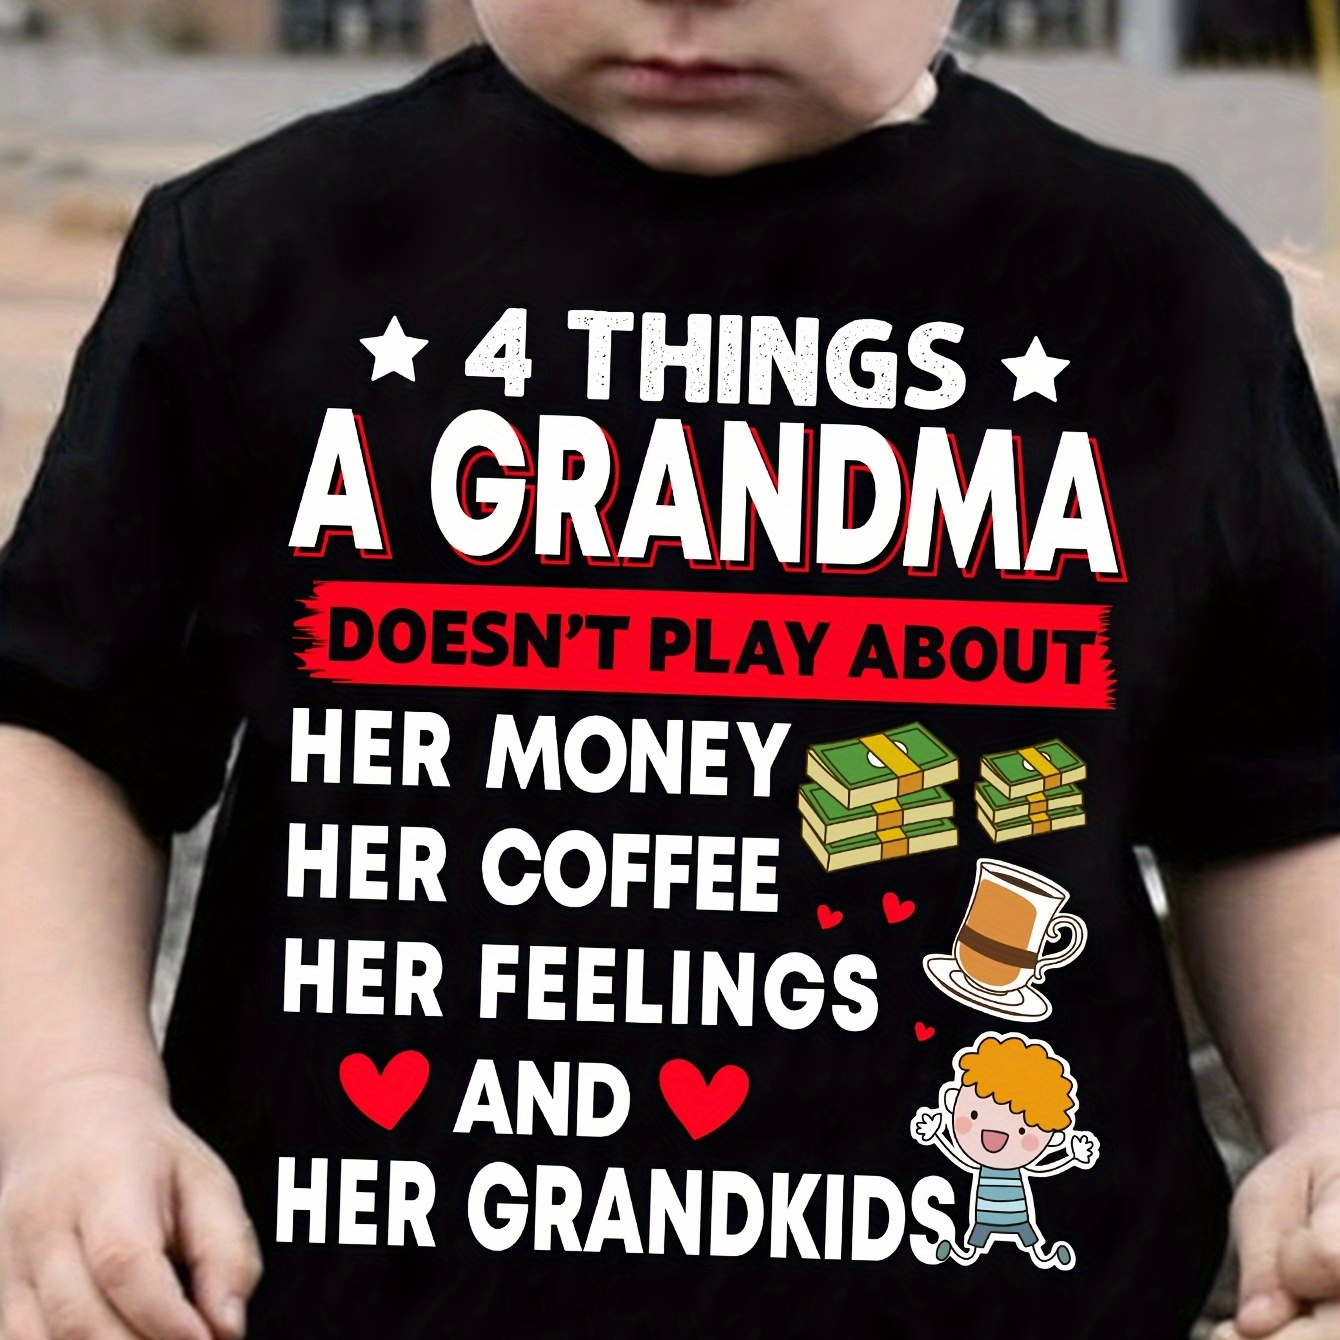 

4 Things A Grandma Doesn't Play About Print Boy's Creative T-shirt, Casual Comfy Short Sleeve Crew Neck Top, Boy's Summer Clothing